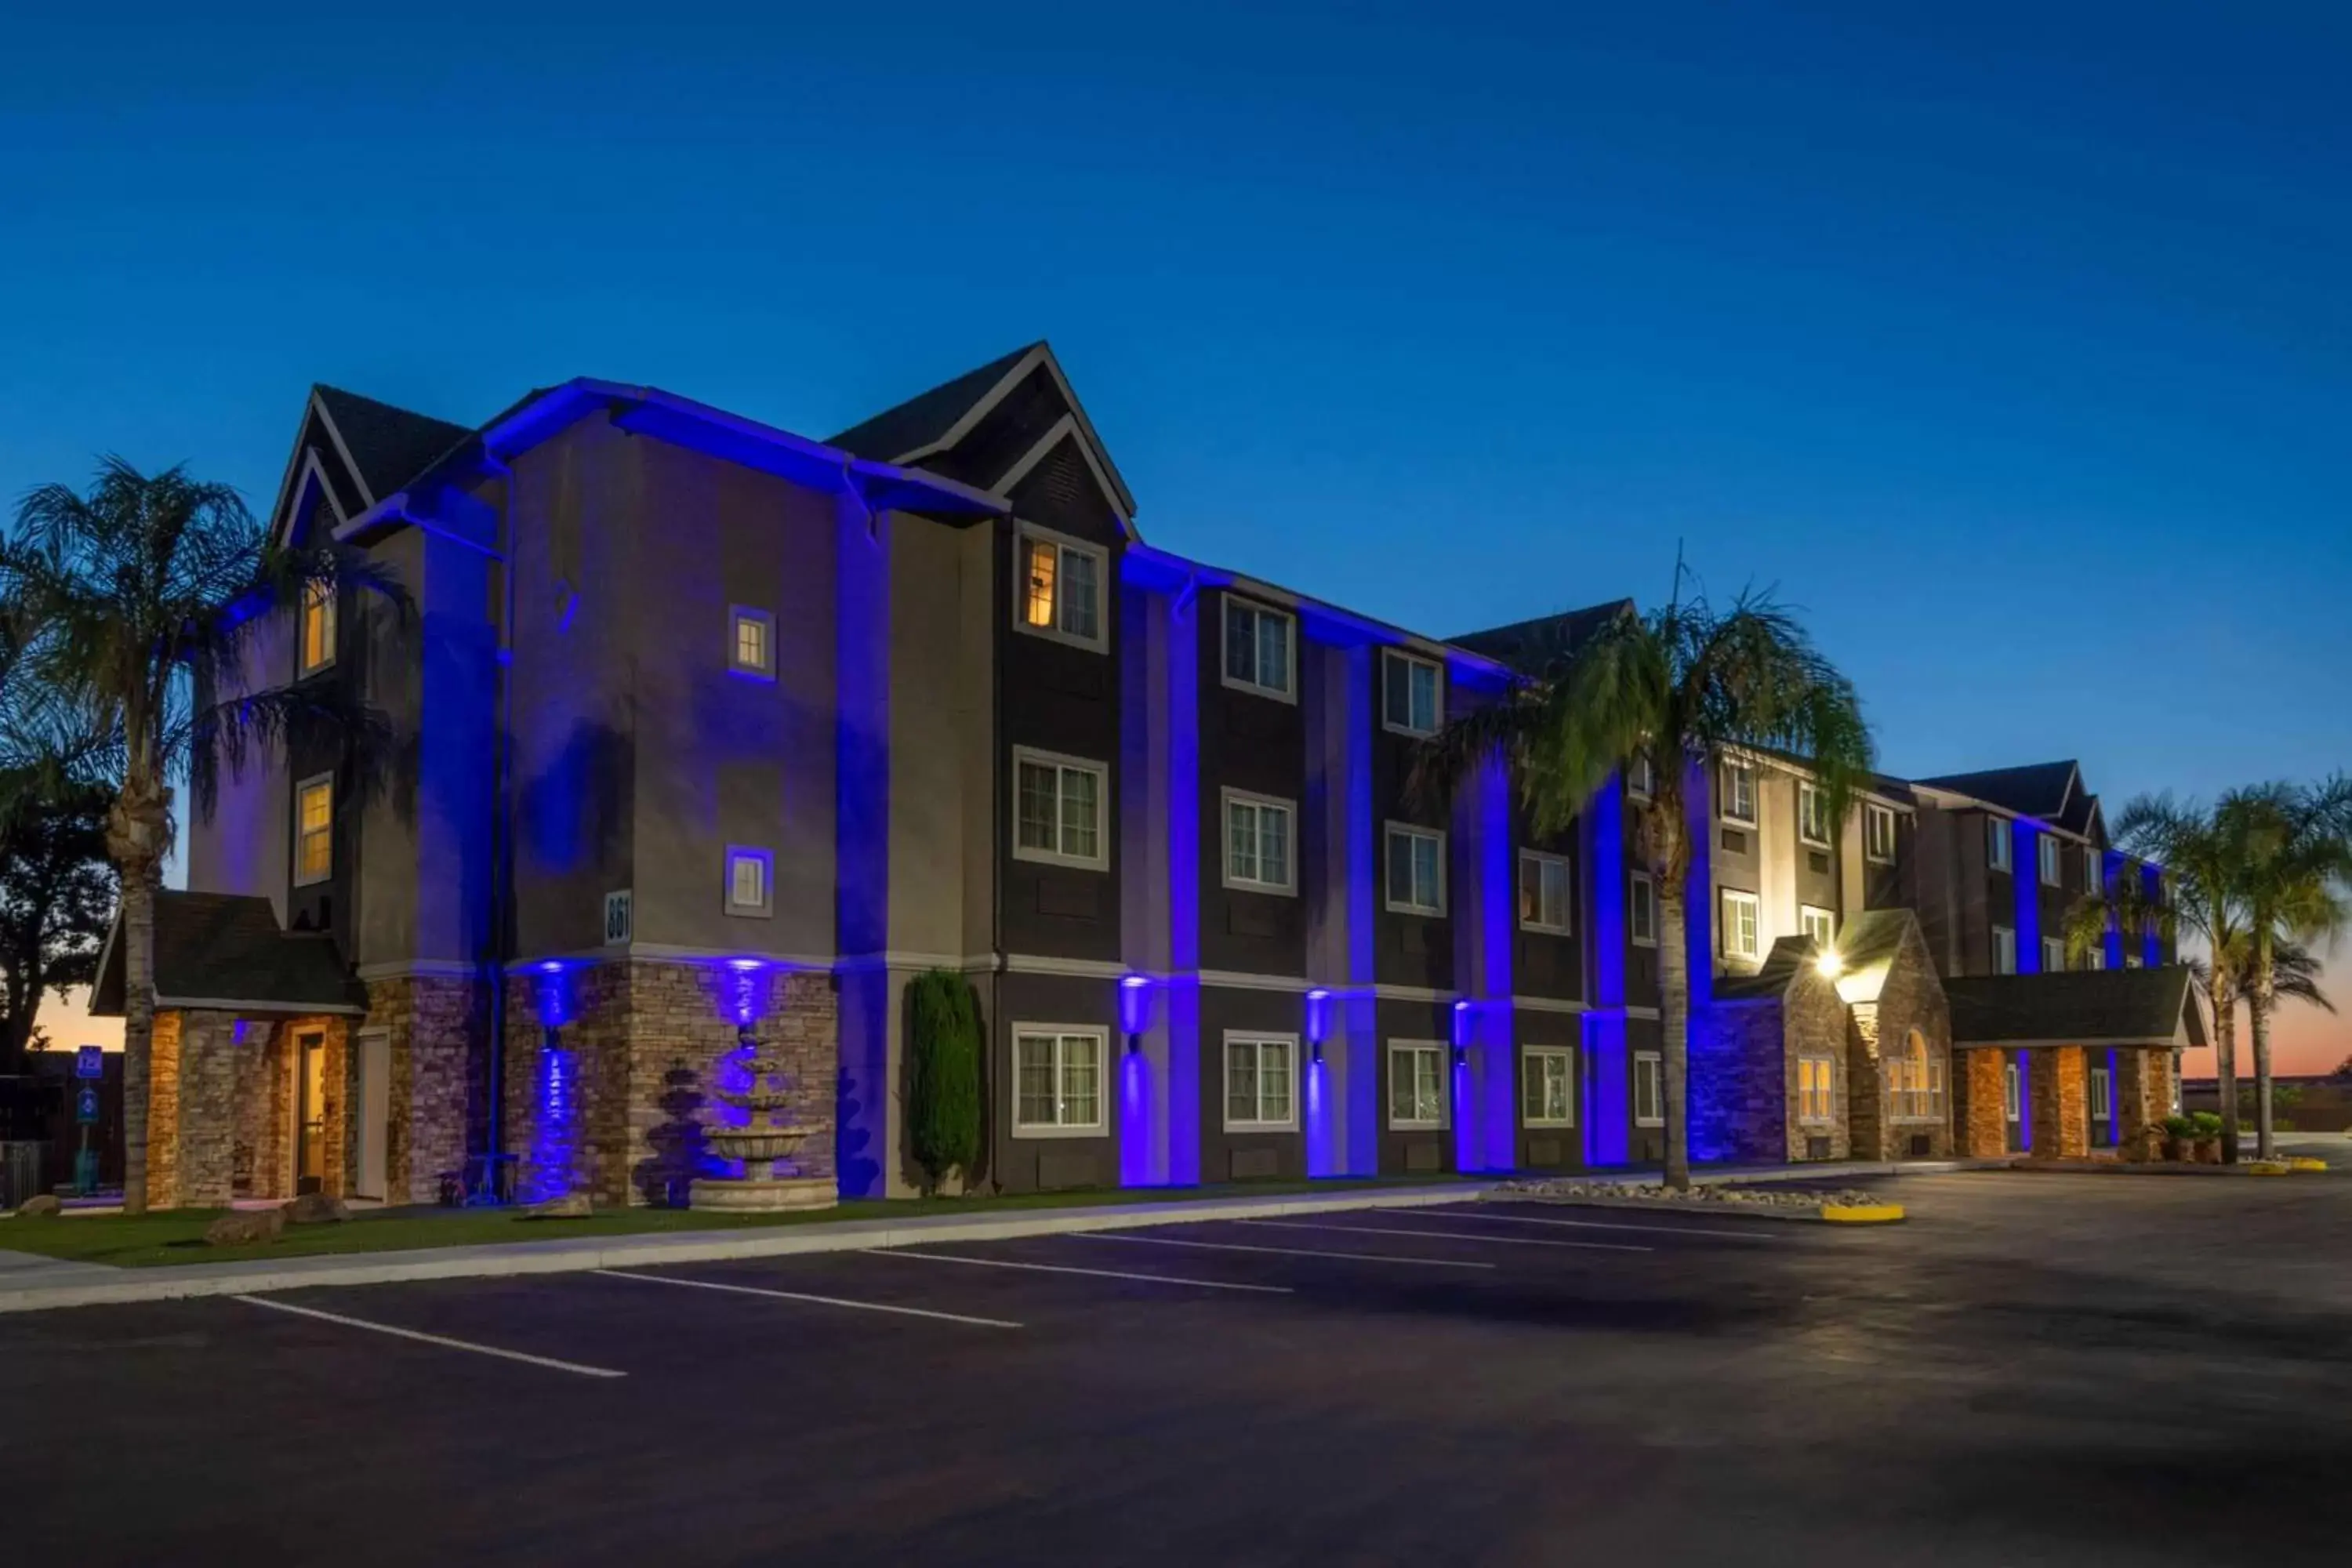 Property Building in Microtel Inn & Suites by Wyndham Tracy